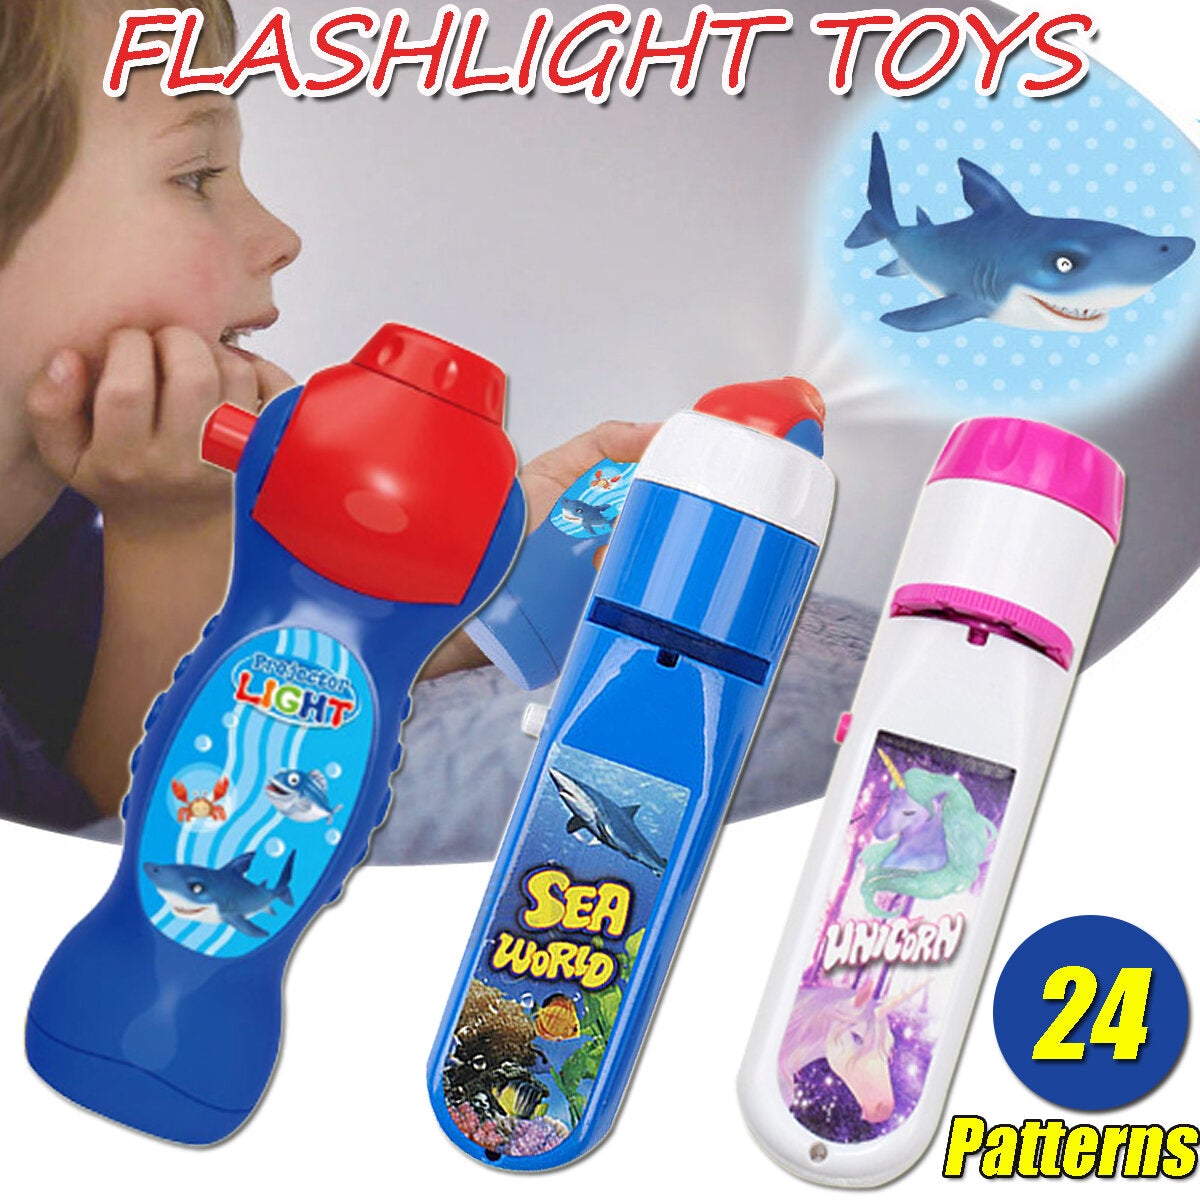 24 Patterns Flashlight Projector Lamp Educational Toy Kids Children Christmas Gift Toys